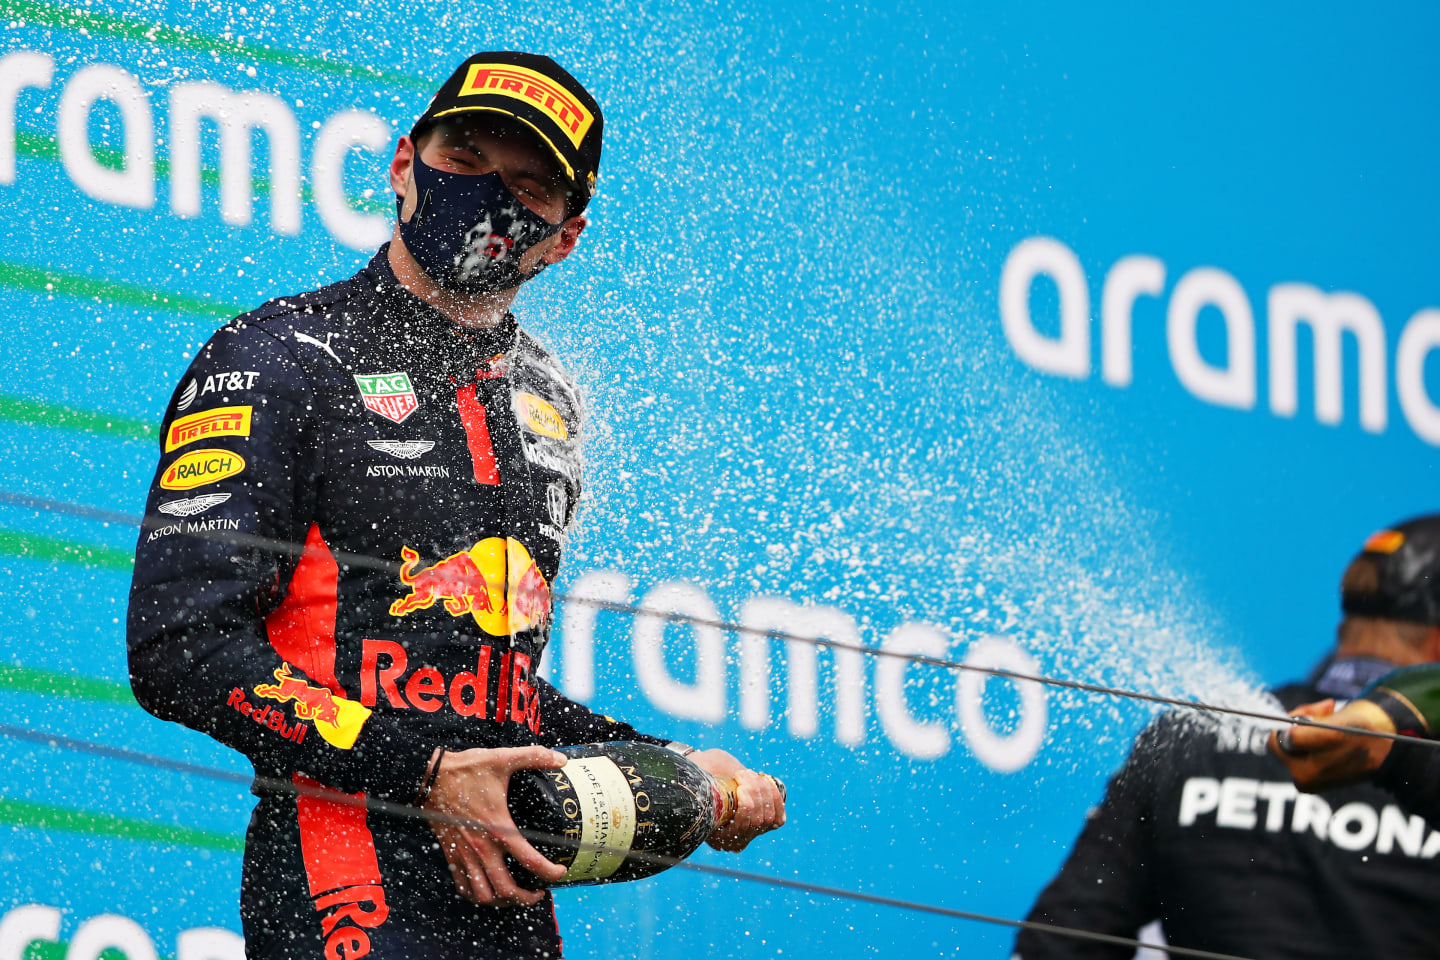 BUDAPEST, HUNGARY - JULY 19: Second placed Max Verstappen of Netherlands and Red Bull Racing celebrates on the podium during the Formula One Grand Prix of Hungary at Hungaroring on July 19, 2020 in Budapest, Hungary. (Photo by Getty Images/Getty Images)